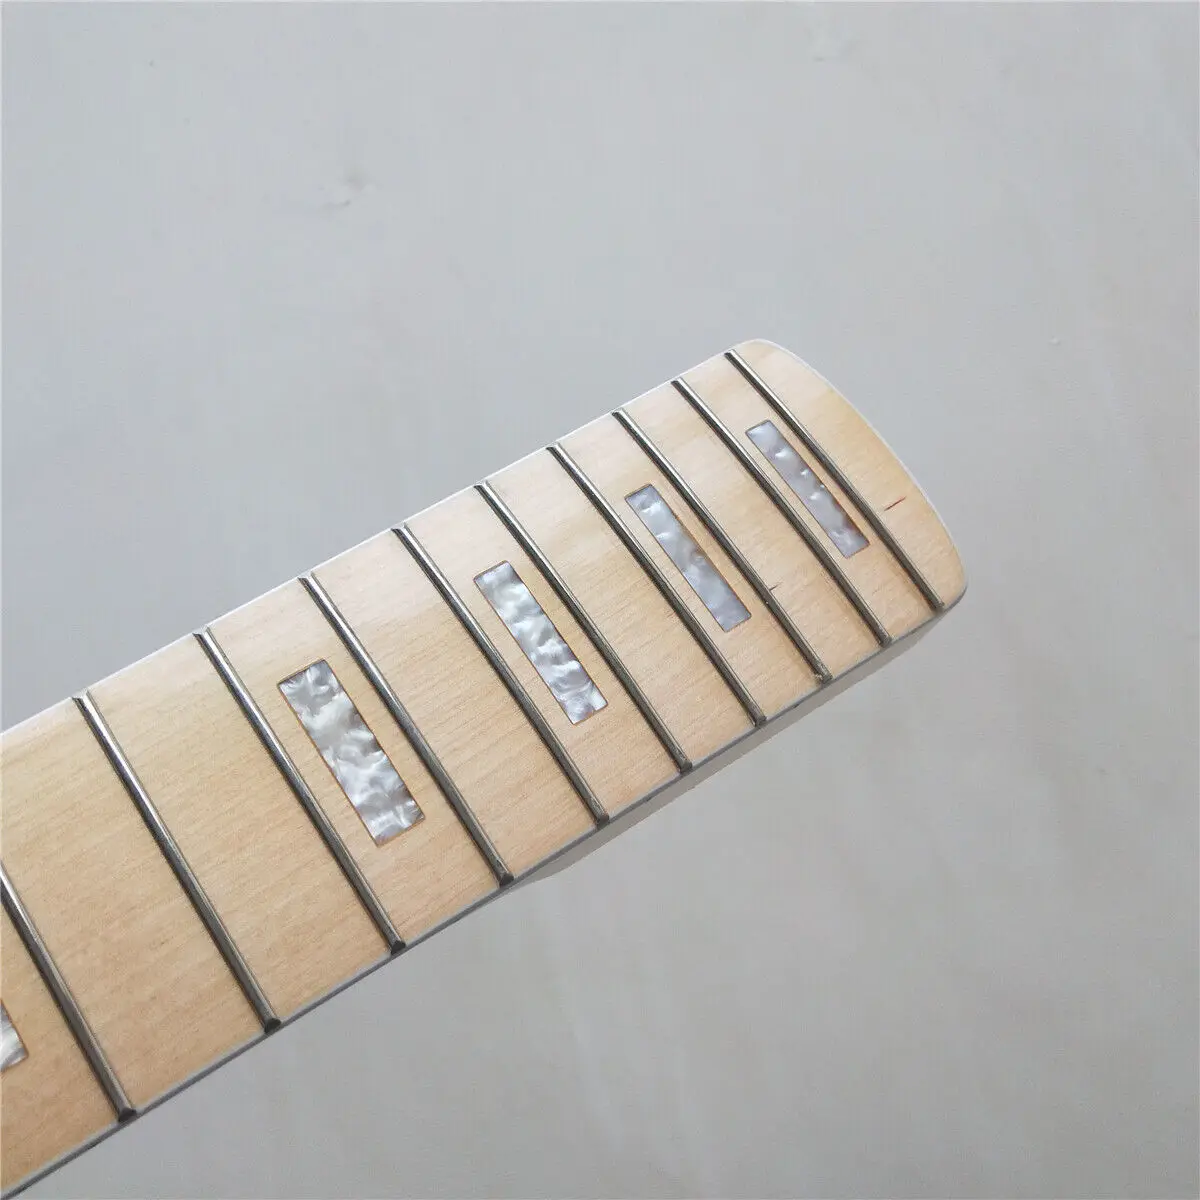 21 Fret 75mm Heel width 5 String Maple Bass Guitar Neck Maple Fingerboard inlay New Replacement enlarge